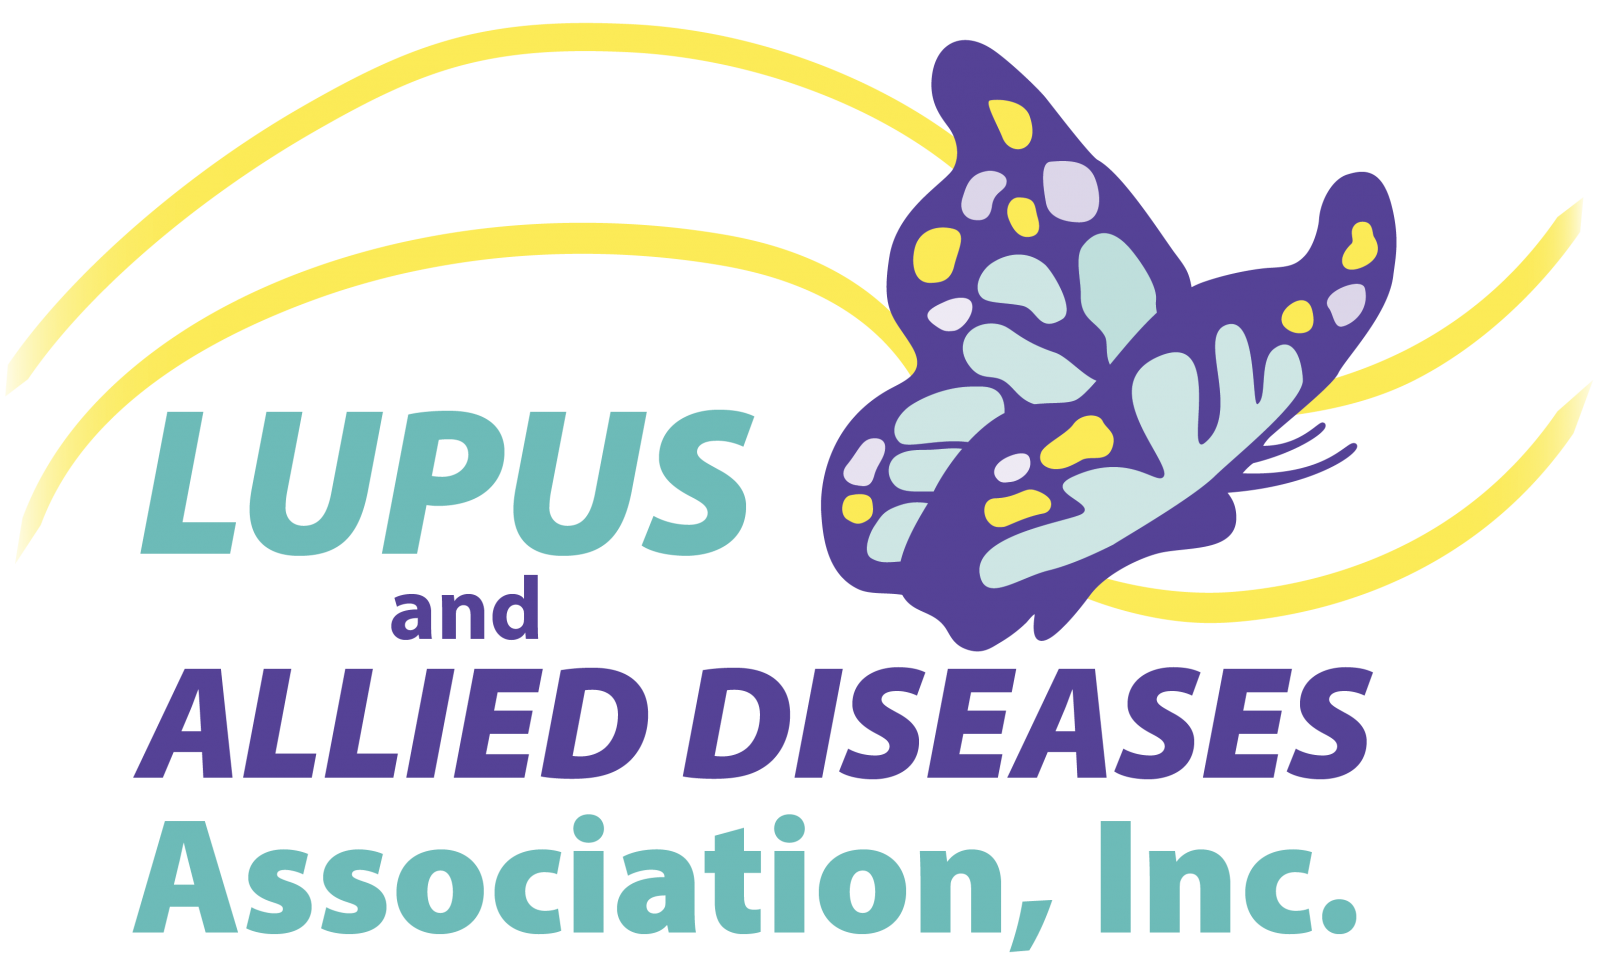 Lupus and Allied Diseases Association, Inc. website